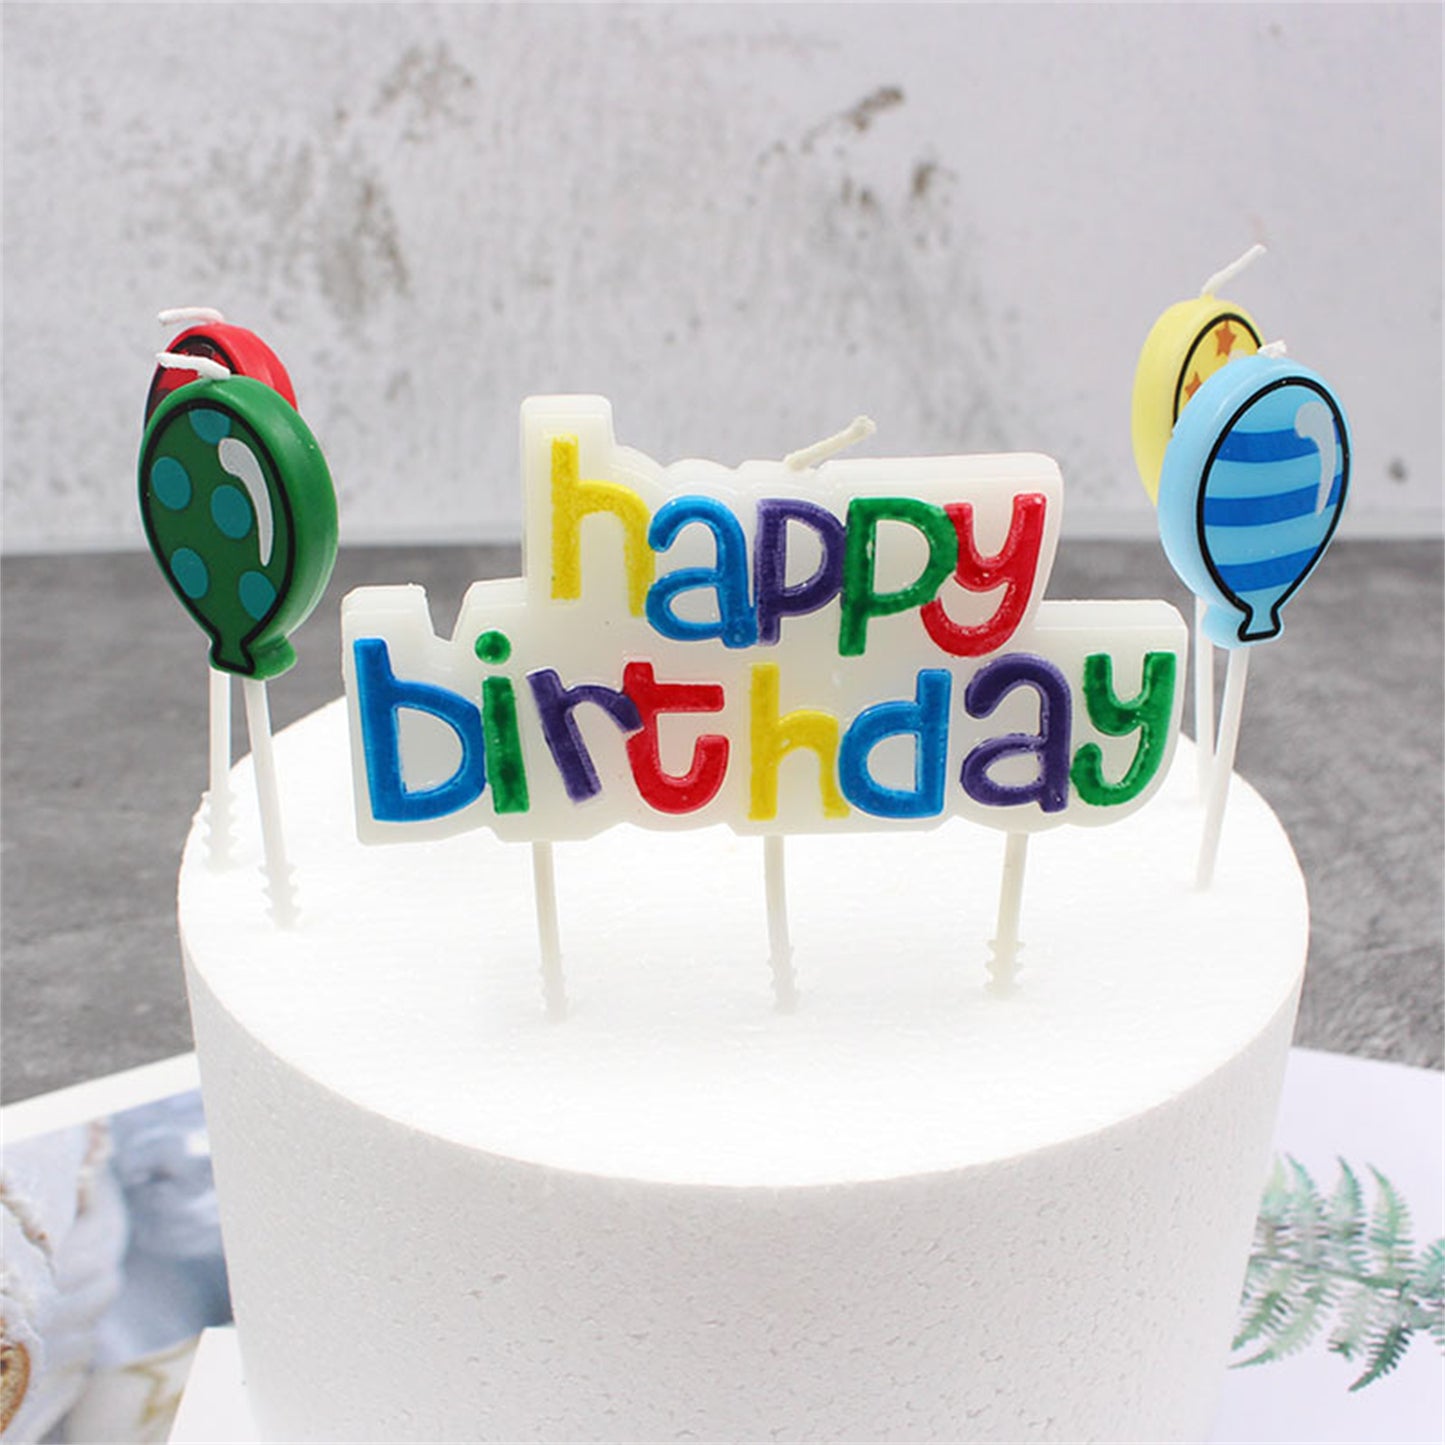 Happy birthday letter candle balloon set candle